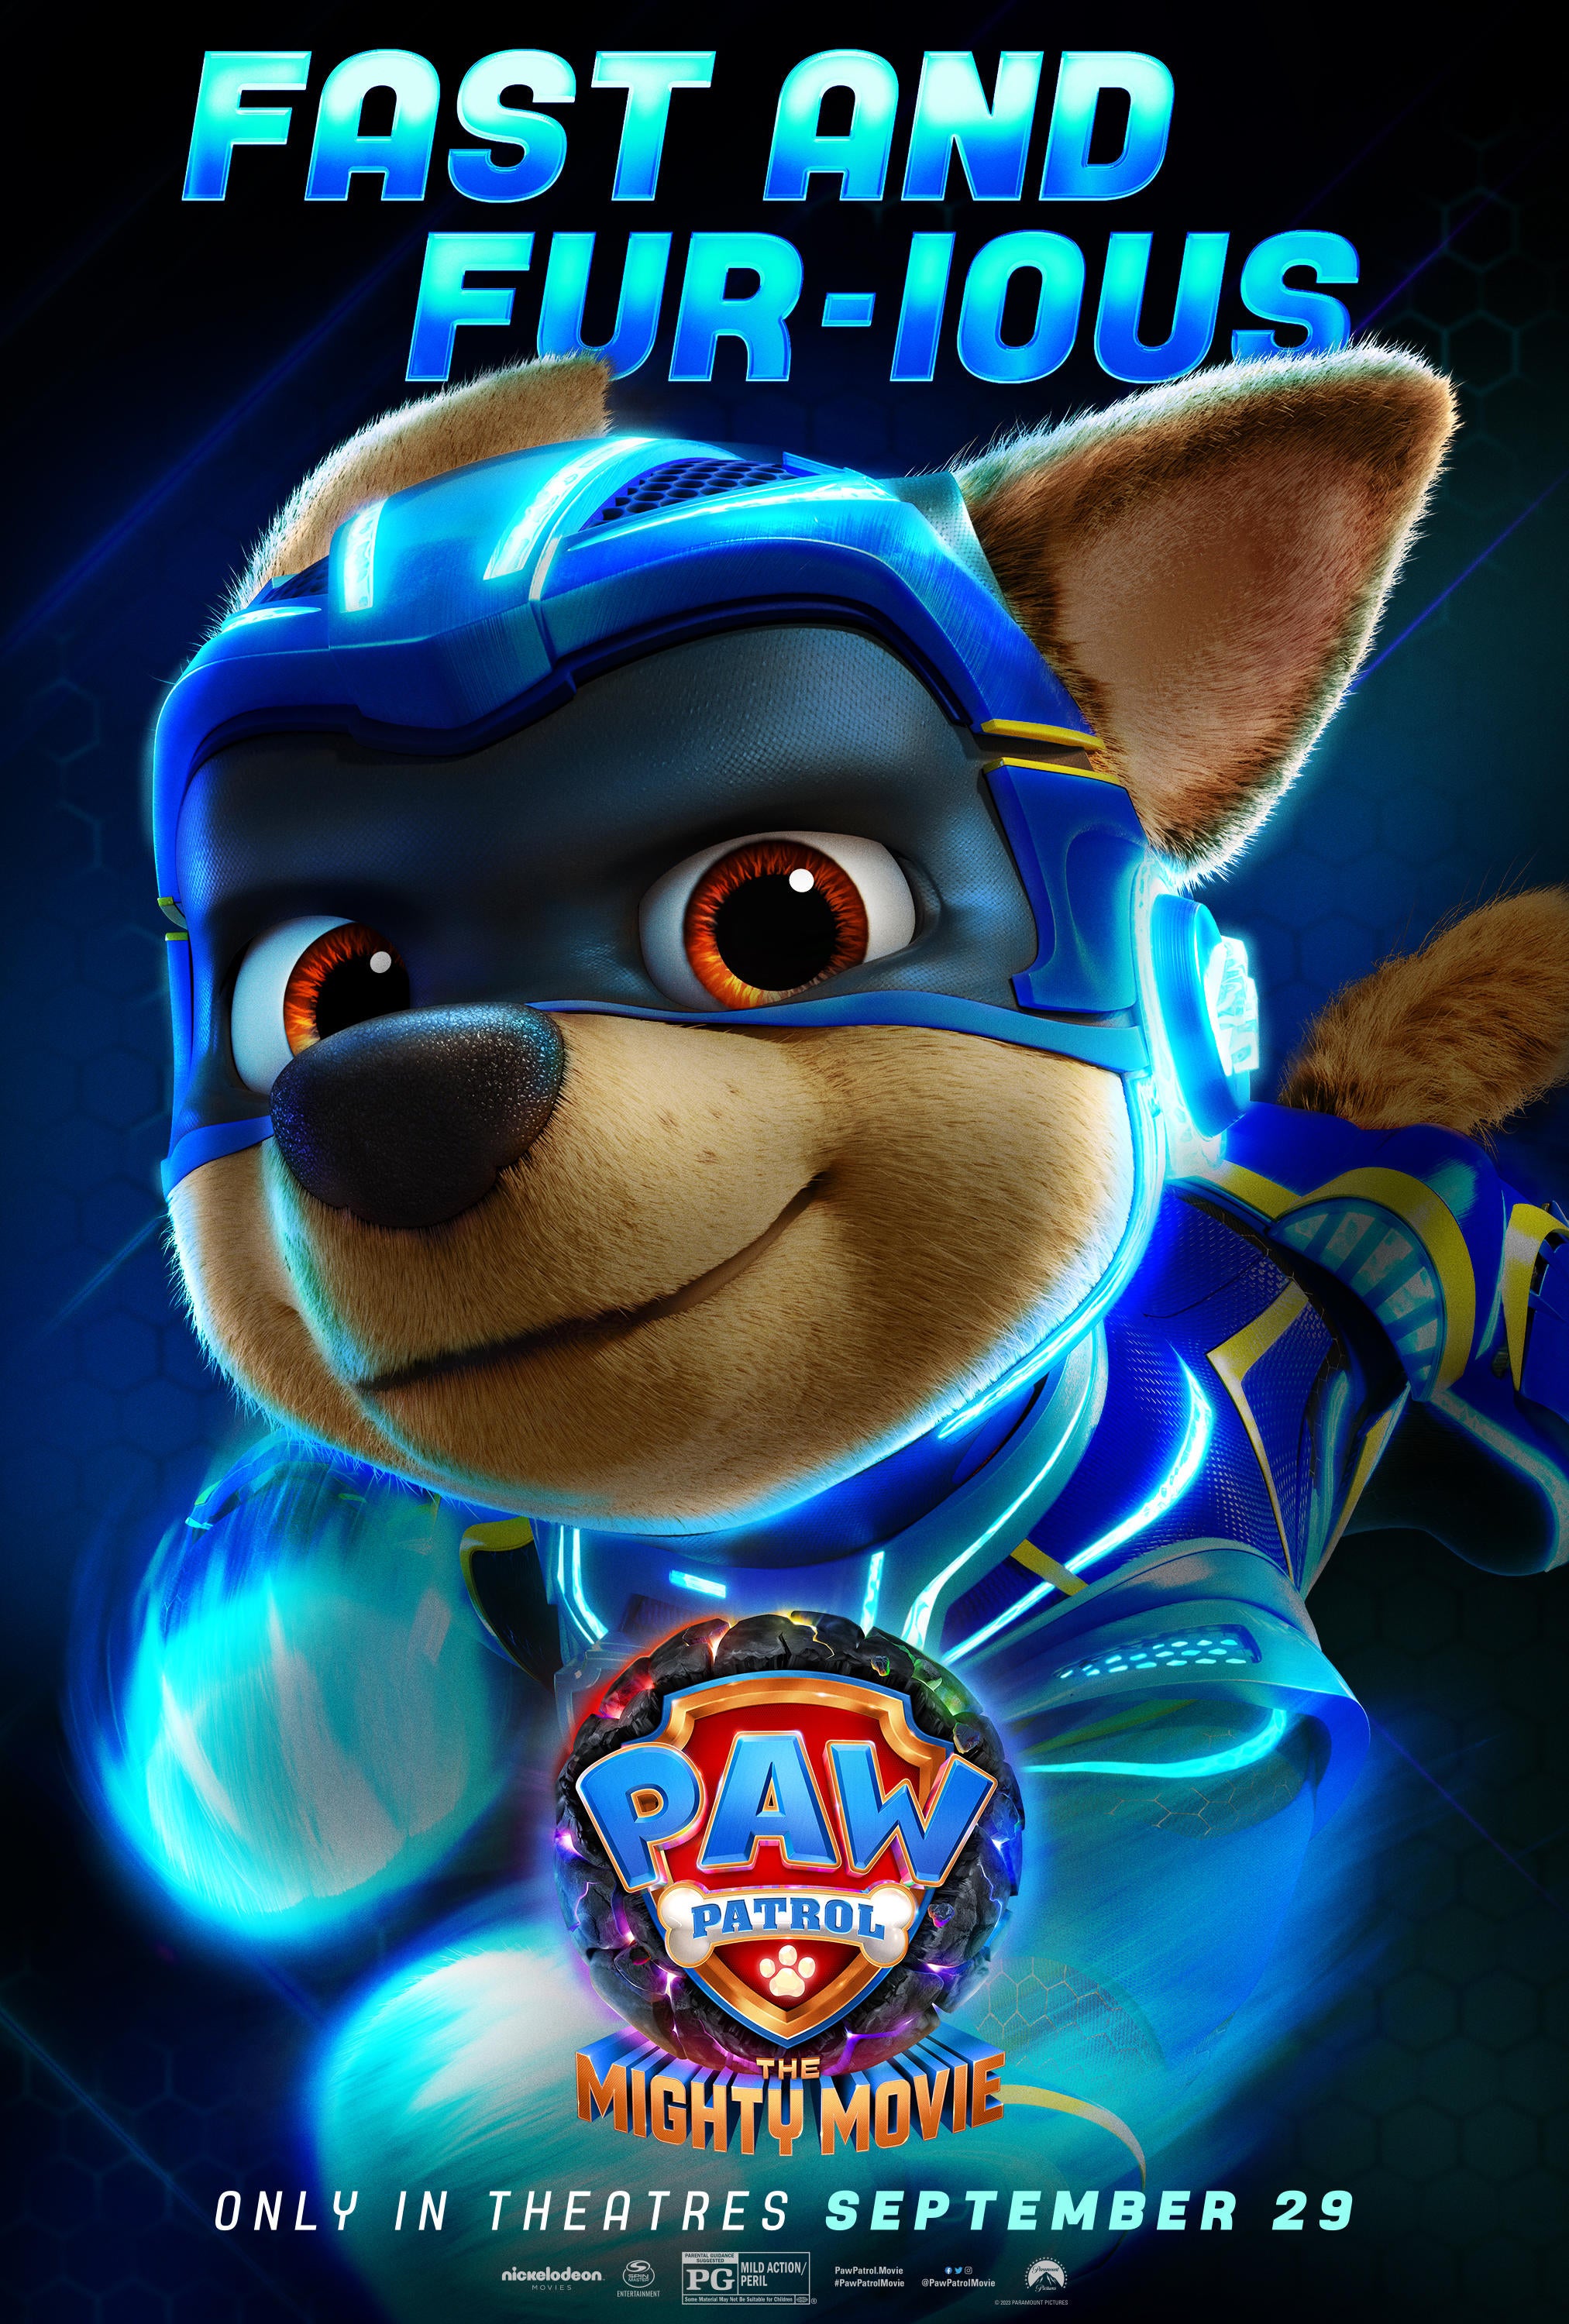 PAW Patrol: The Mighty Movie Character Posters: Chase